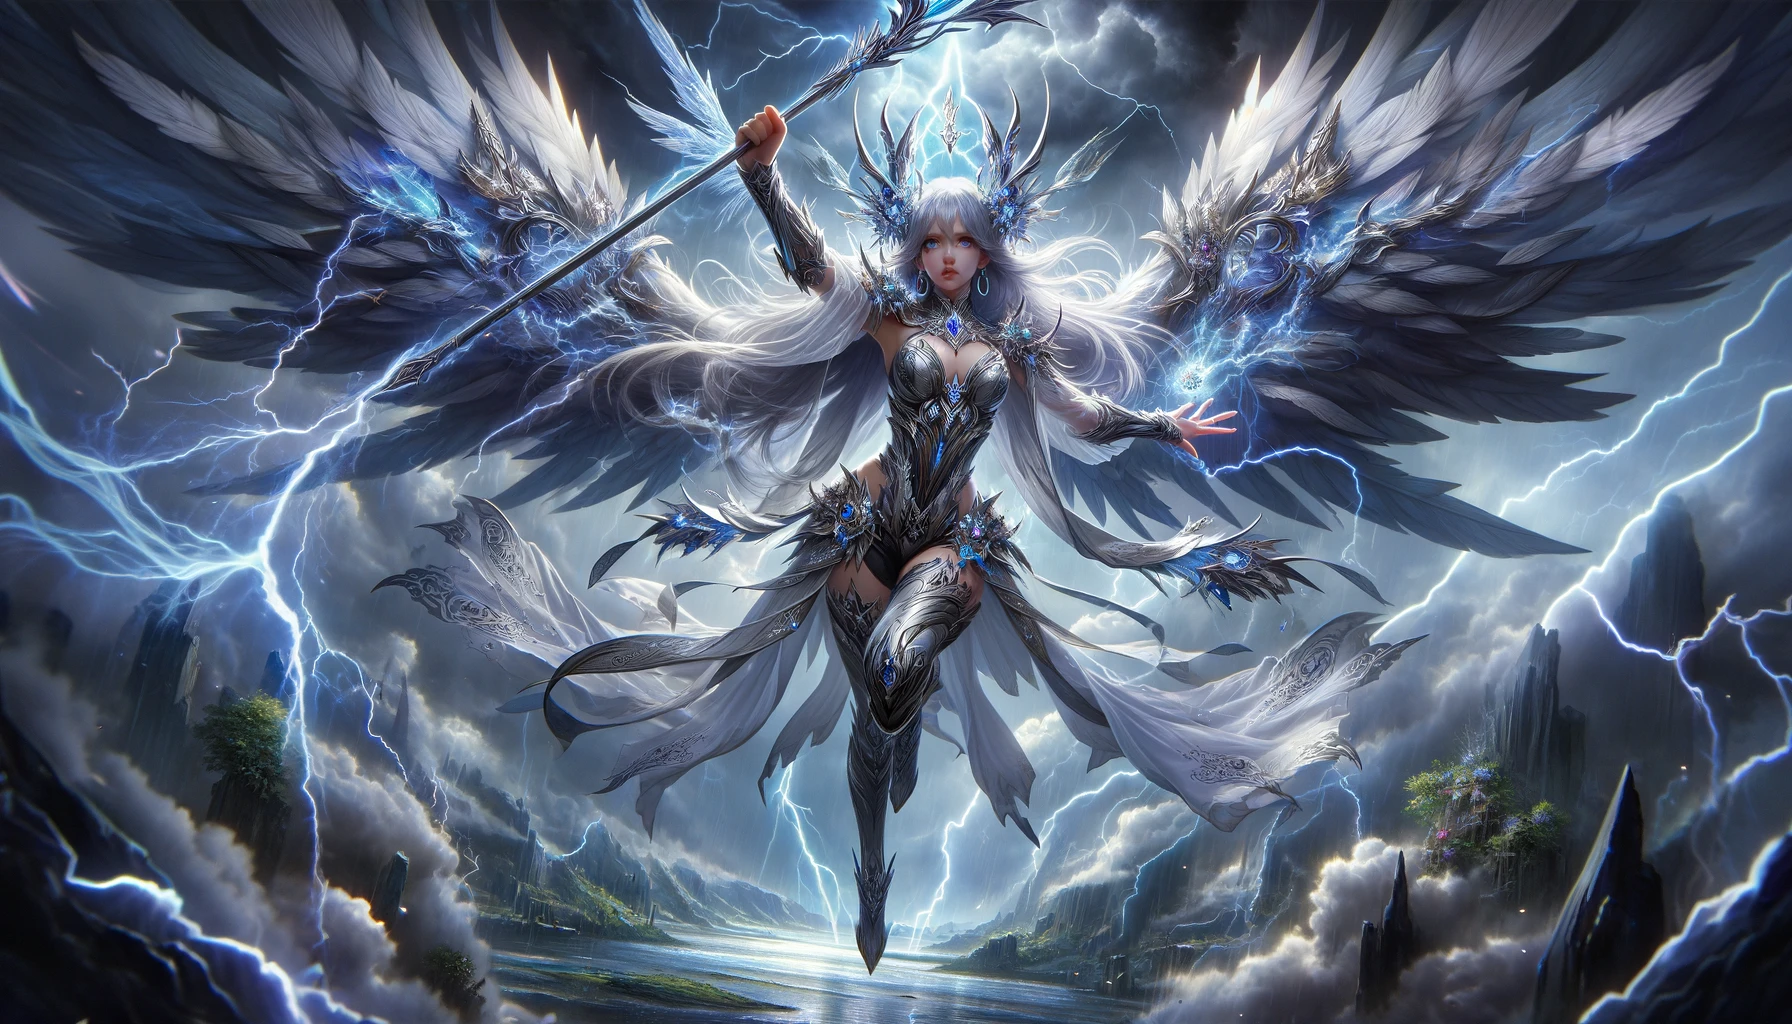 "Wings of Lightning: Celia and the Battle of the Sky"